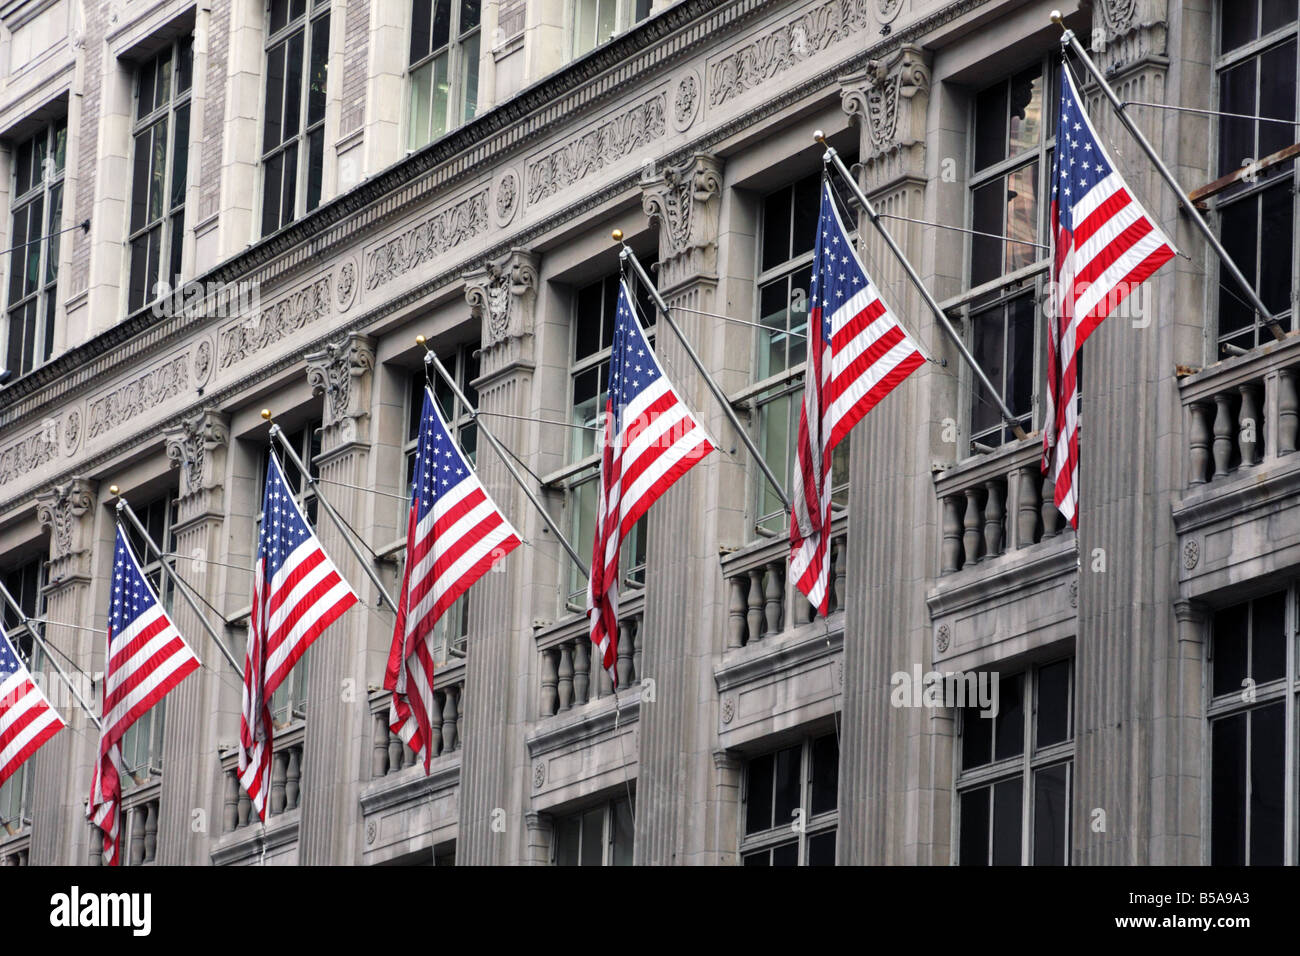 American flags in Saks Company Building on Fifth Avenue in Manhatten New York City Stock Photo